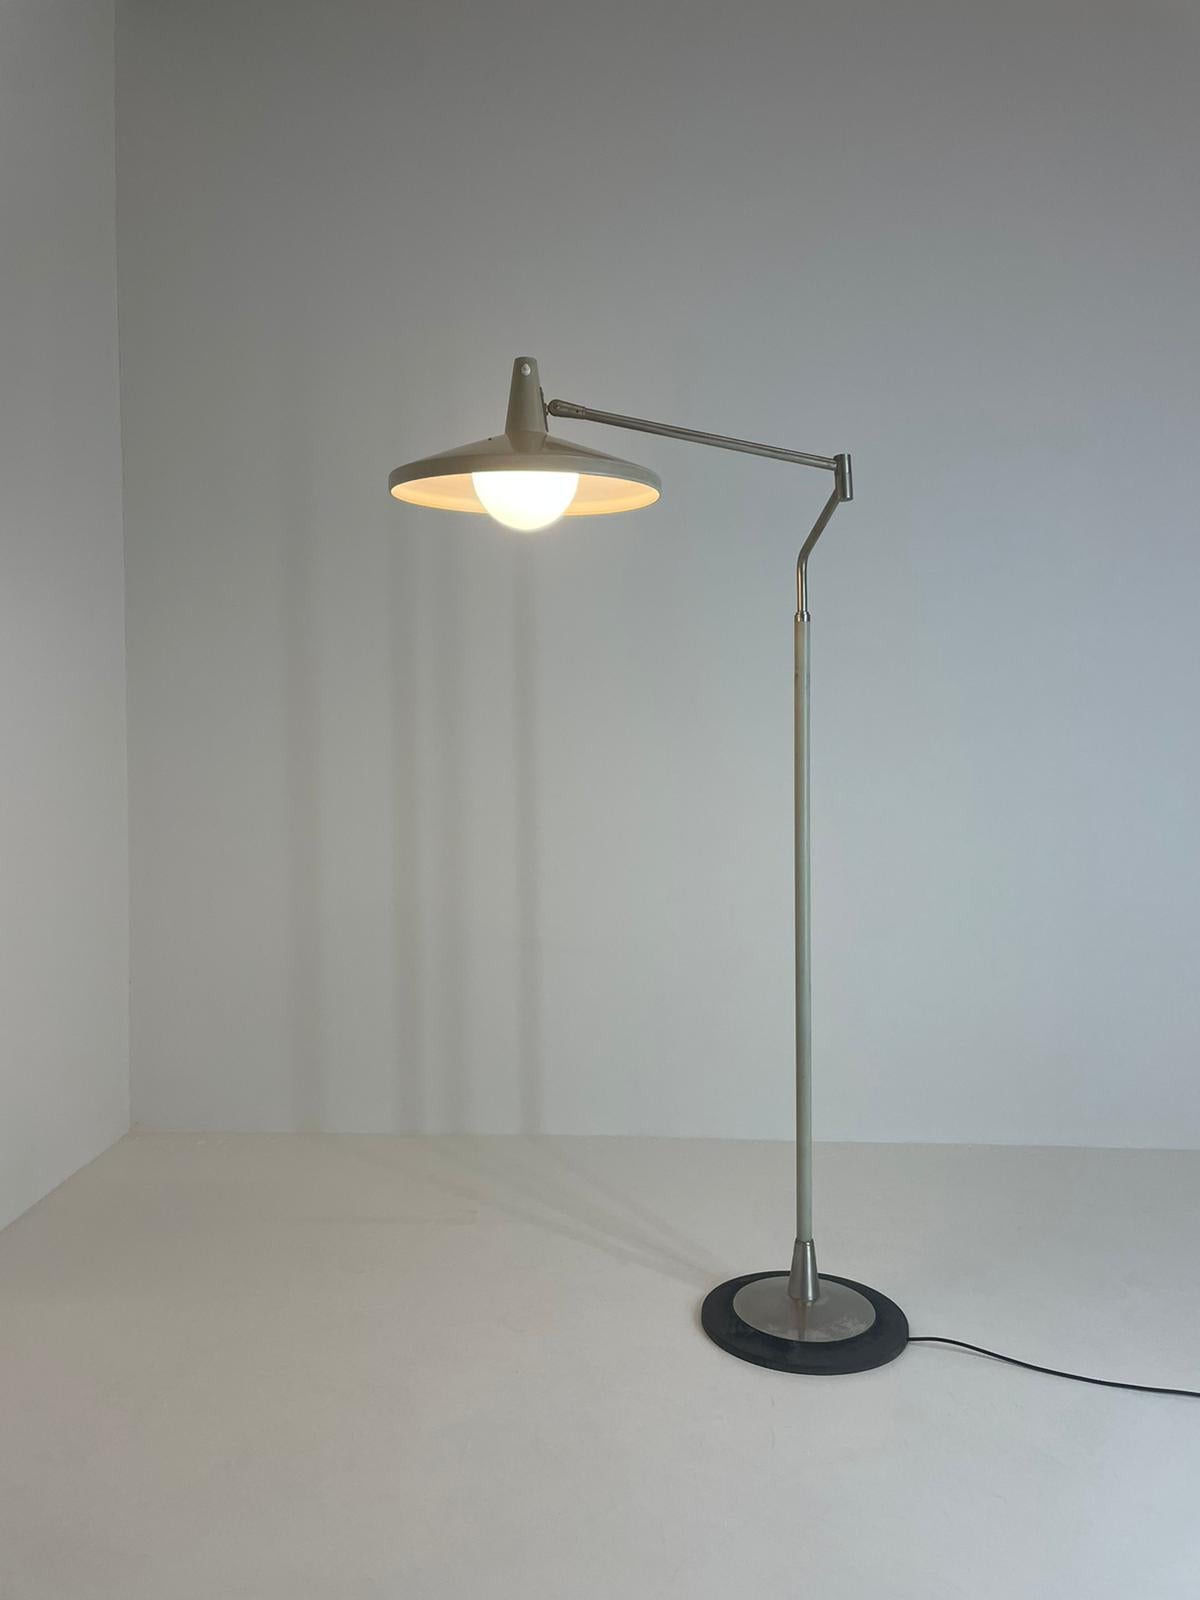 You are looking at a wonderful lamp produced by the Stilnovo company in 1962.
Particular in design, the extendable arm and the adjustable gray cup (diameter 40 cm) will allow you various possibilities to direct the light. The lamp has its original